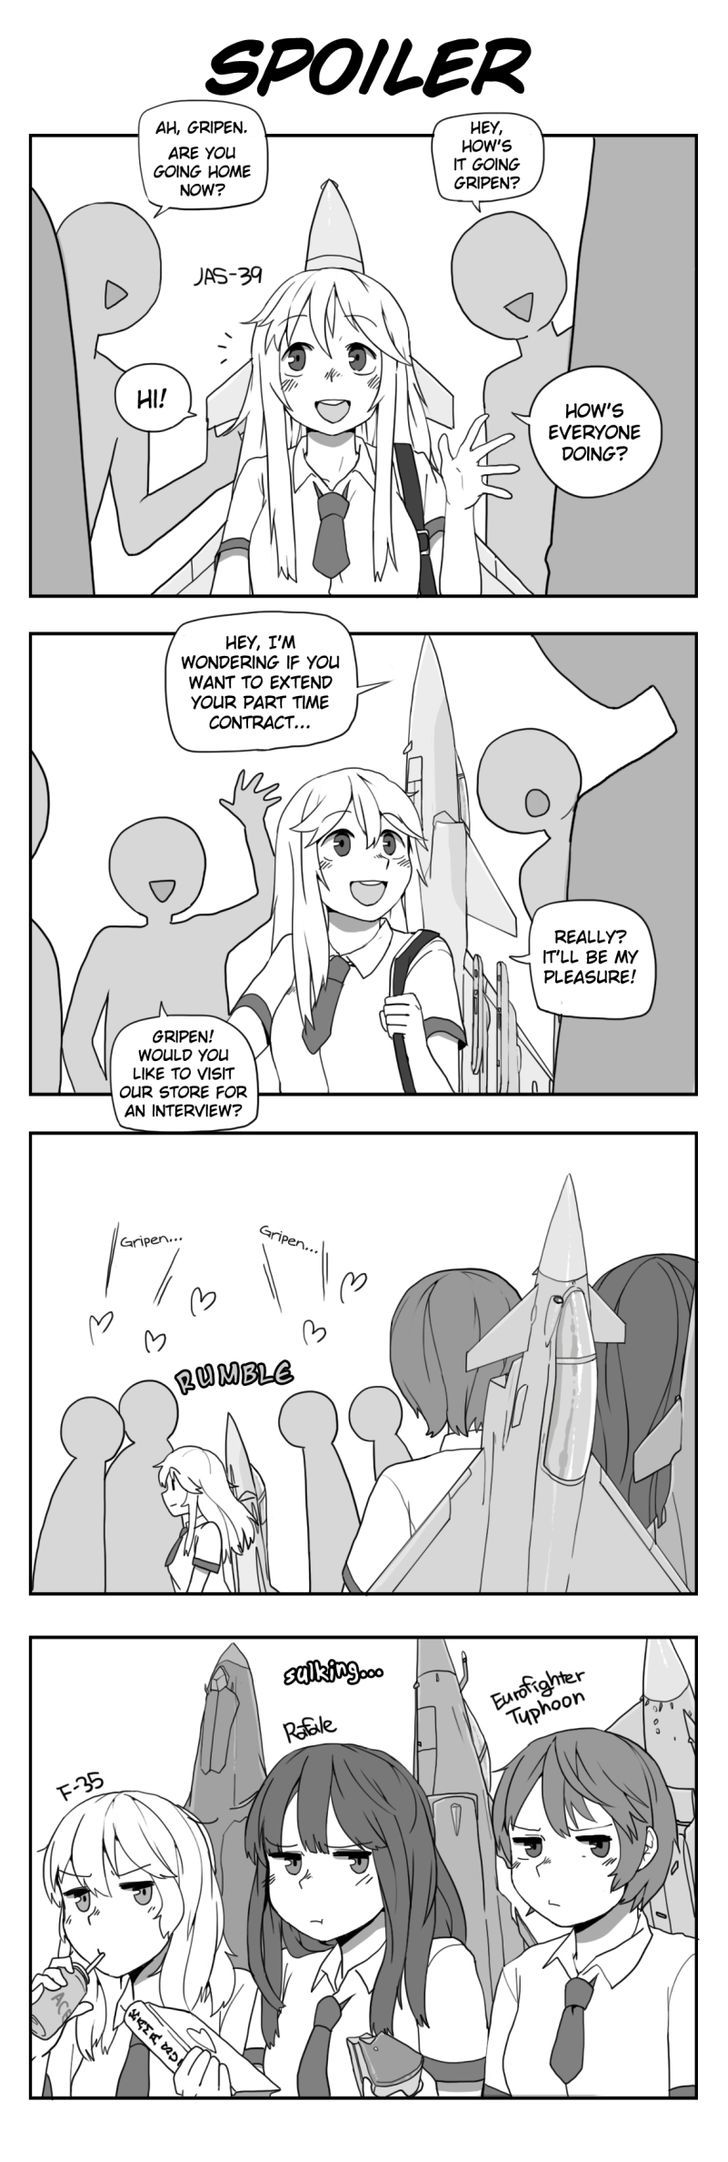 Flight Highschool Chapter 16 : 4Koma Collection - Picture 1